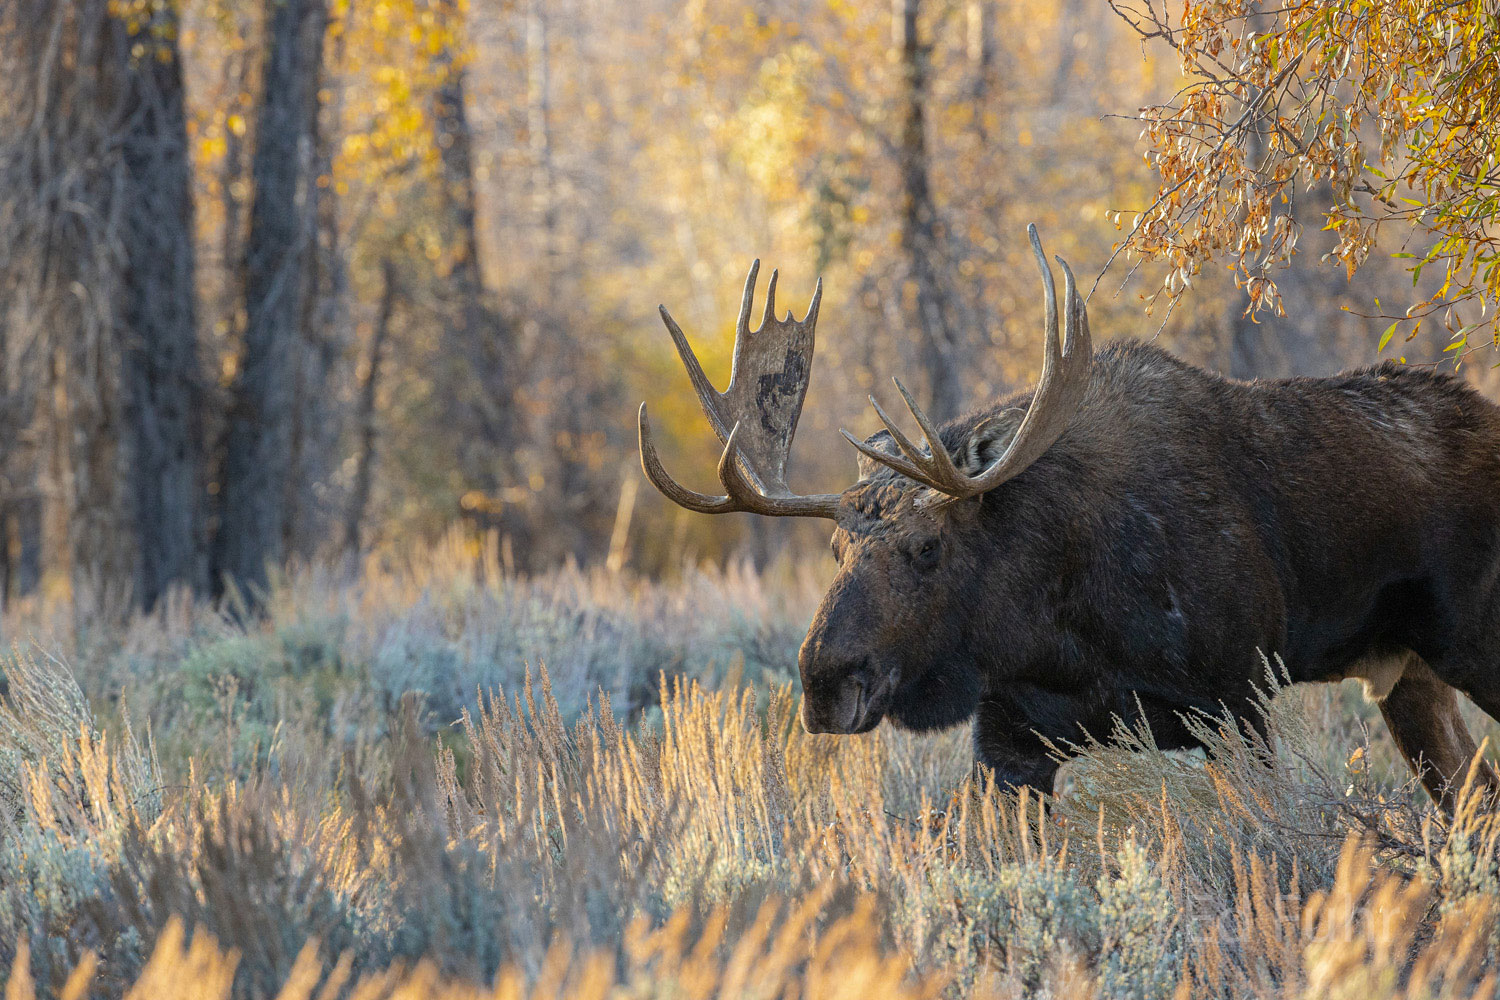 A large and aging bull moose, showing the wear and tear of time, slowly makes his way through the grasses and cottonwoods.